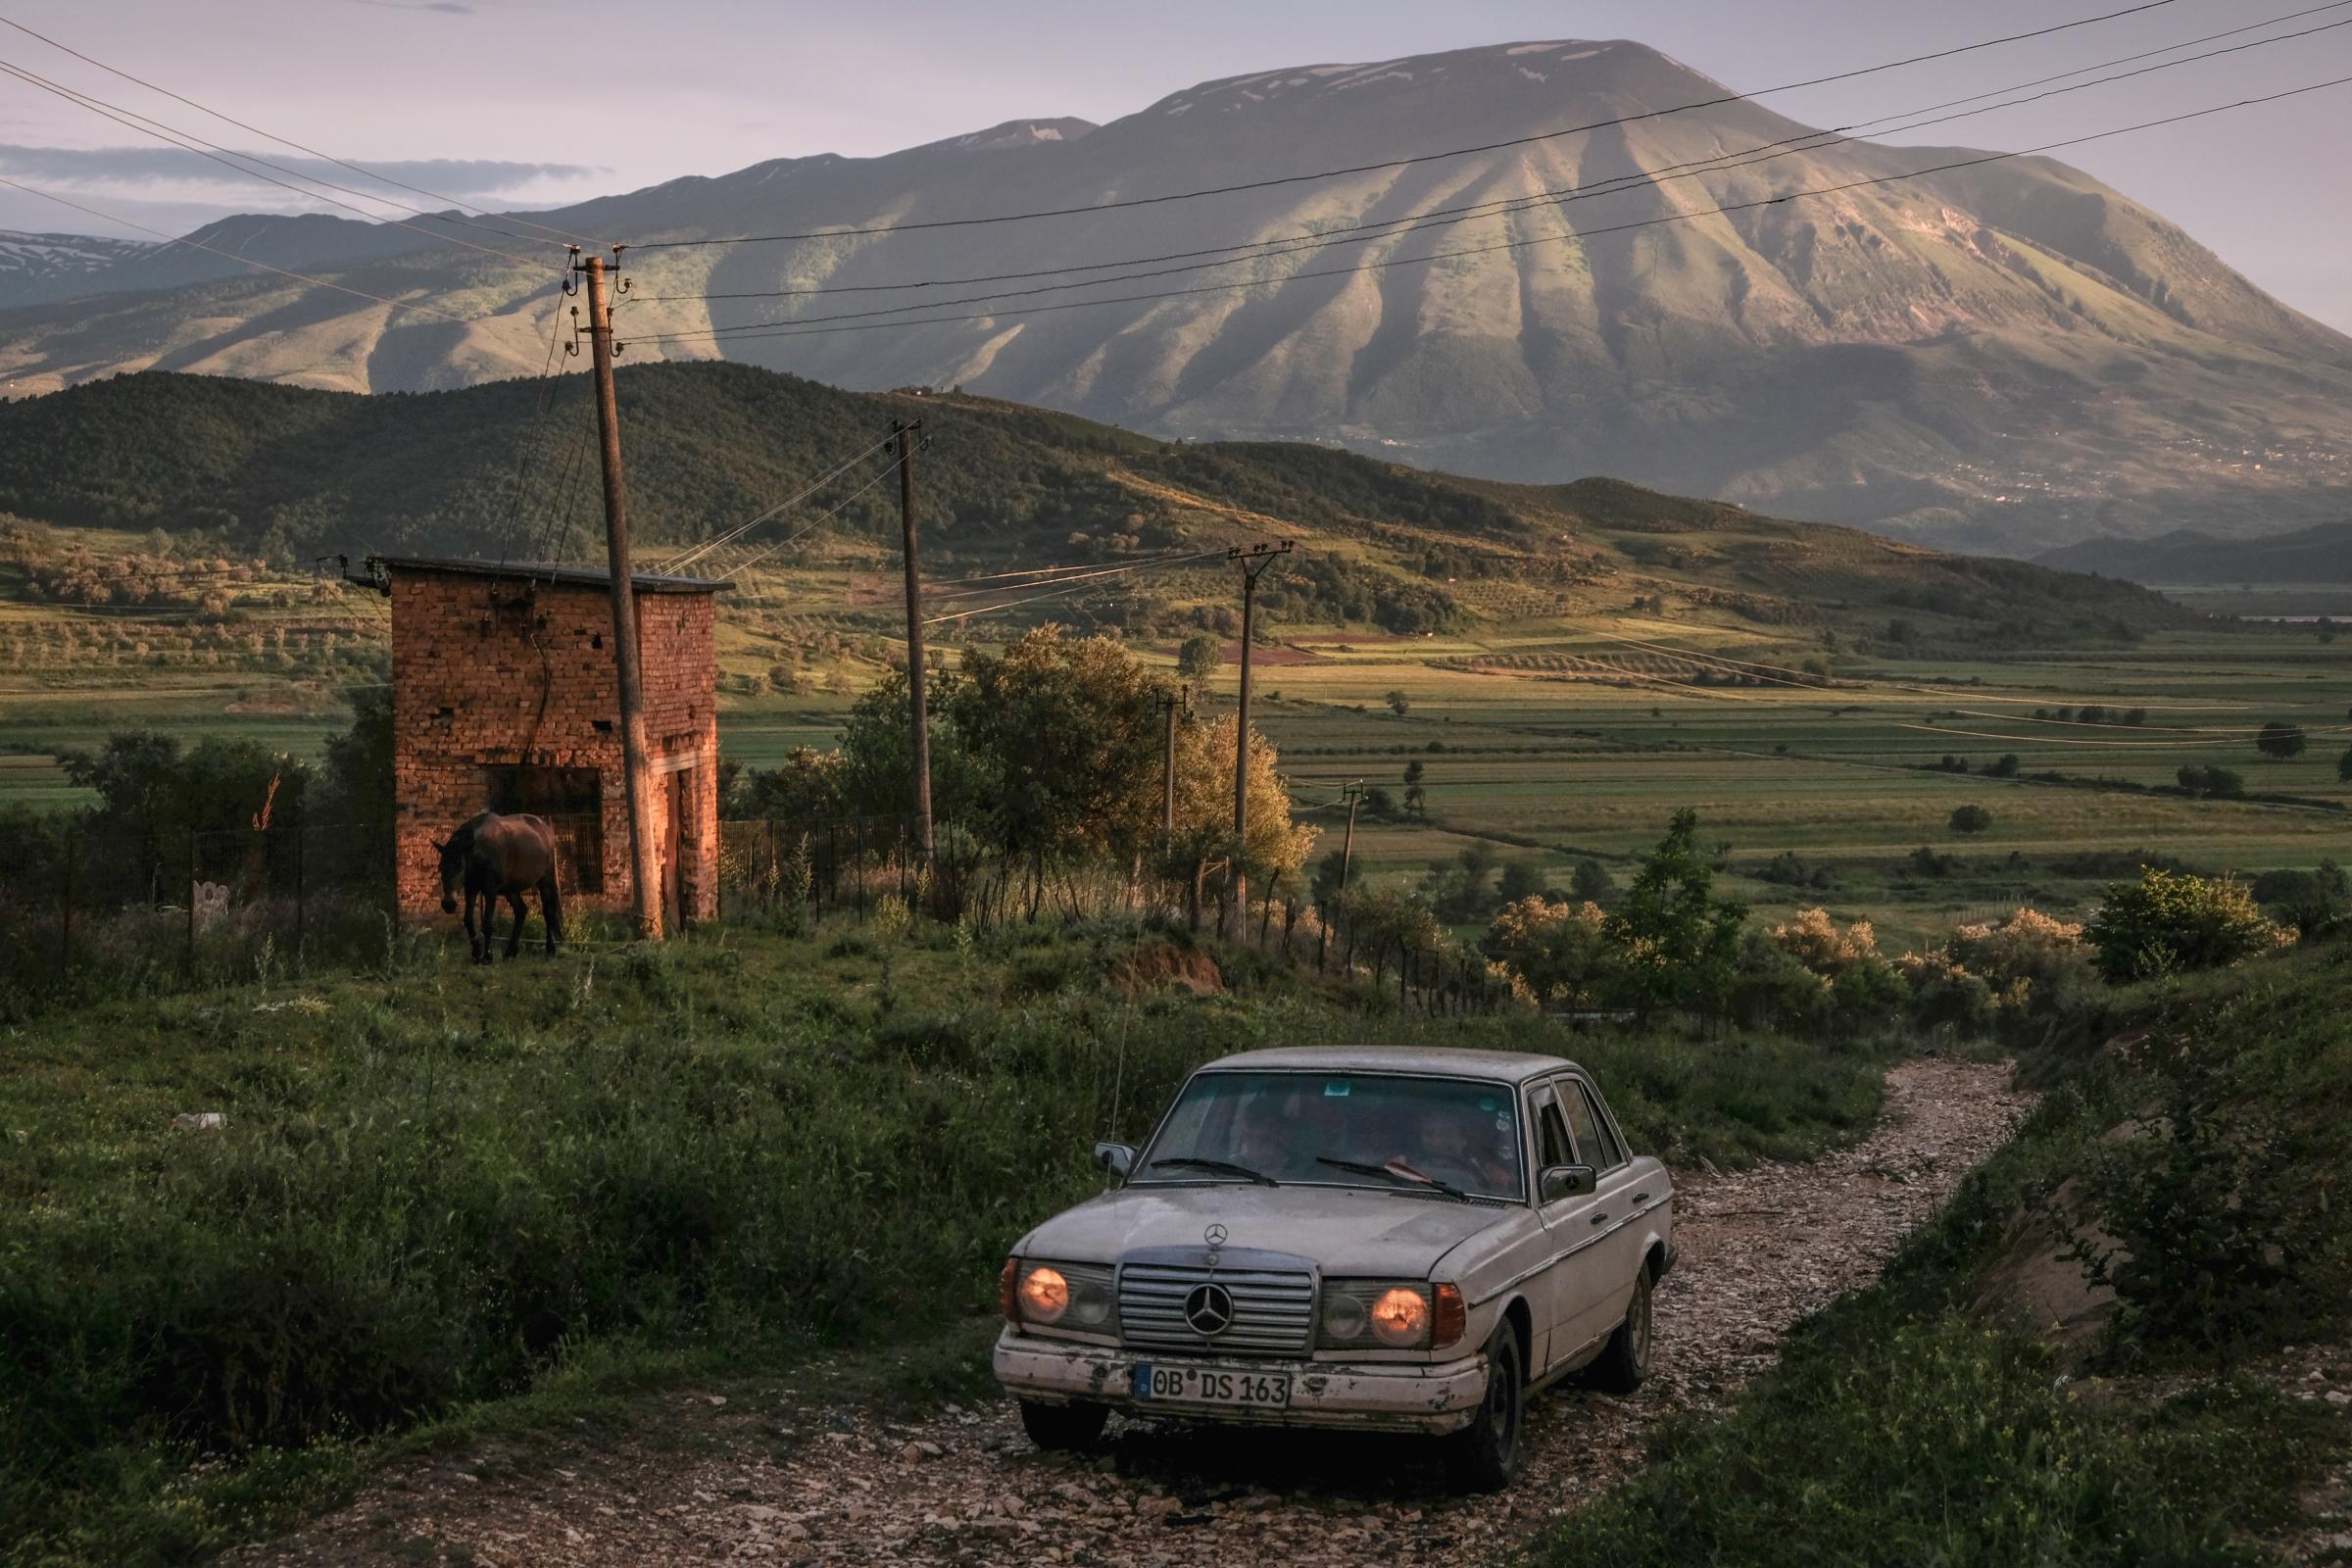 The Vjosa: Portraits of Life on Europe's Last Wild River - A car returning from farmland near the village of Kuta in...